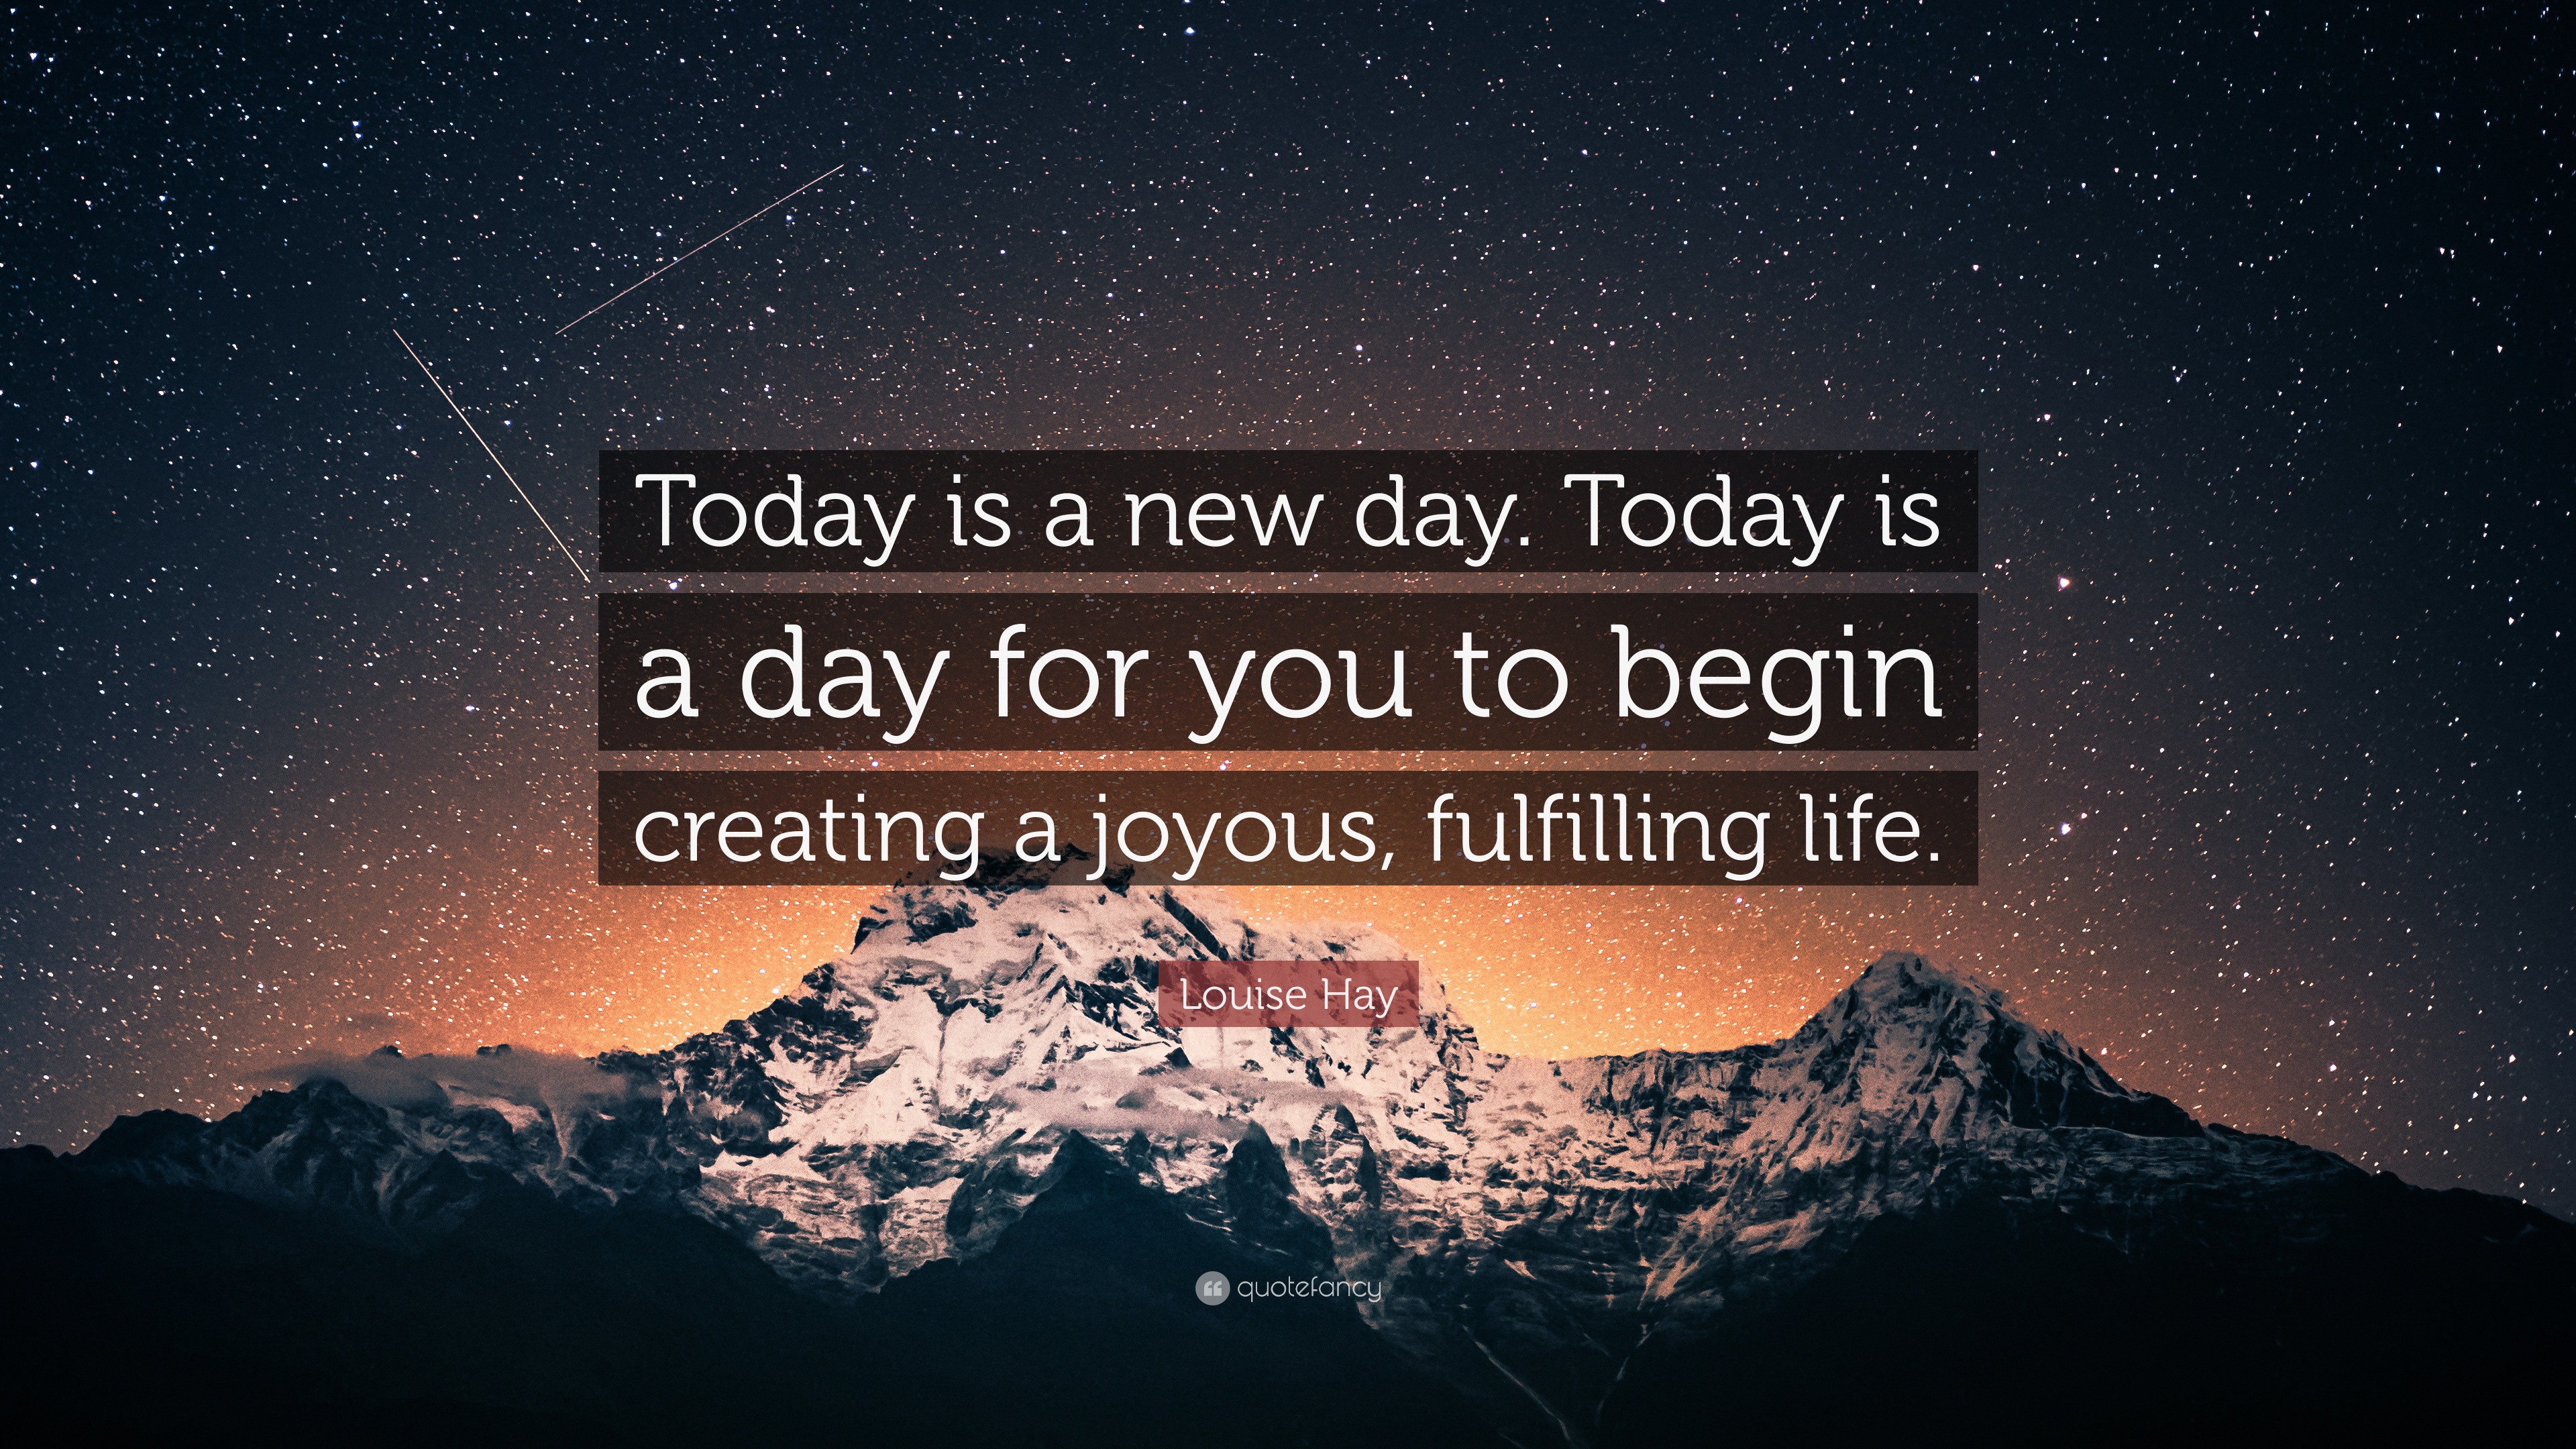 Louise Hay Quote: "Today is a new day. Today is a day for you to begin ...